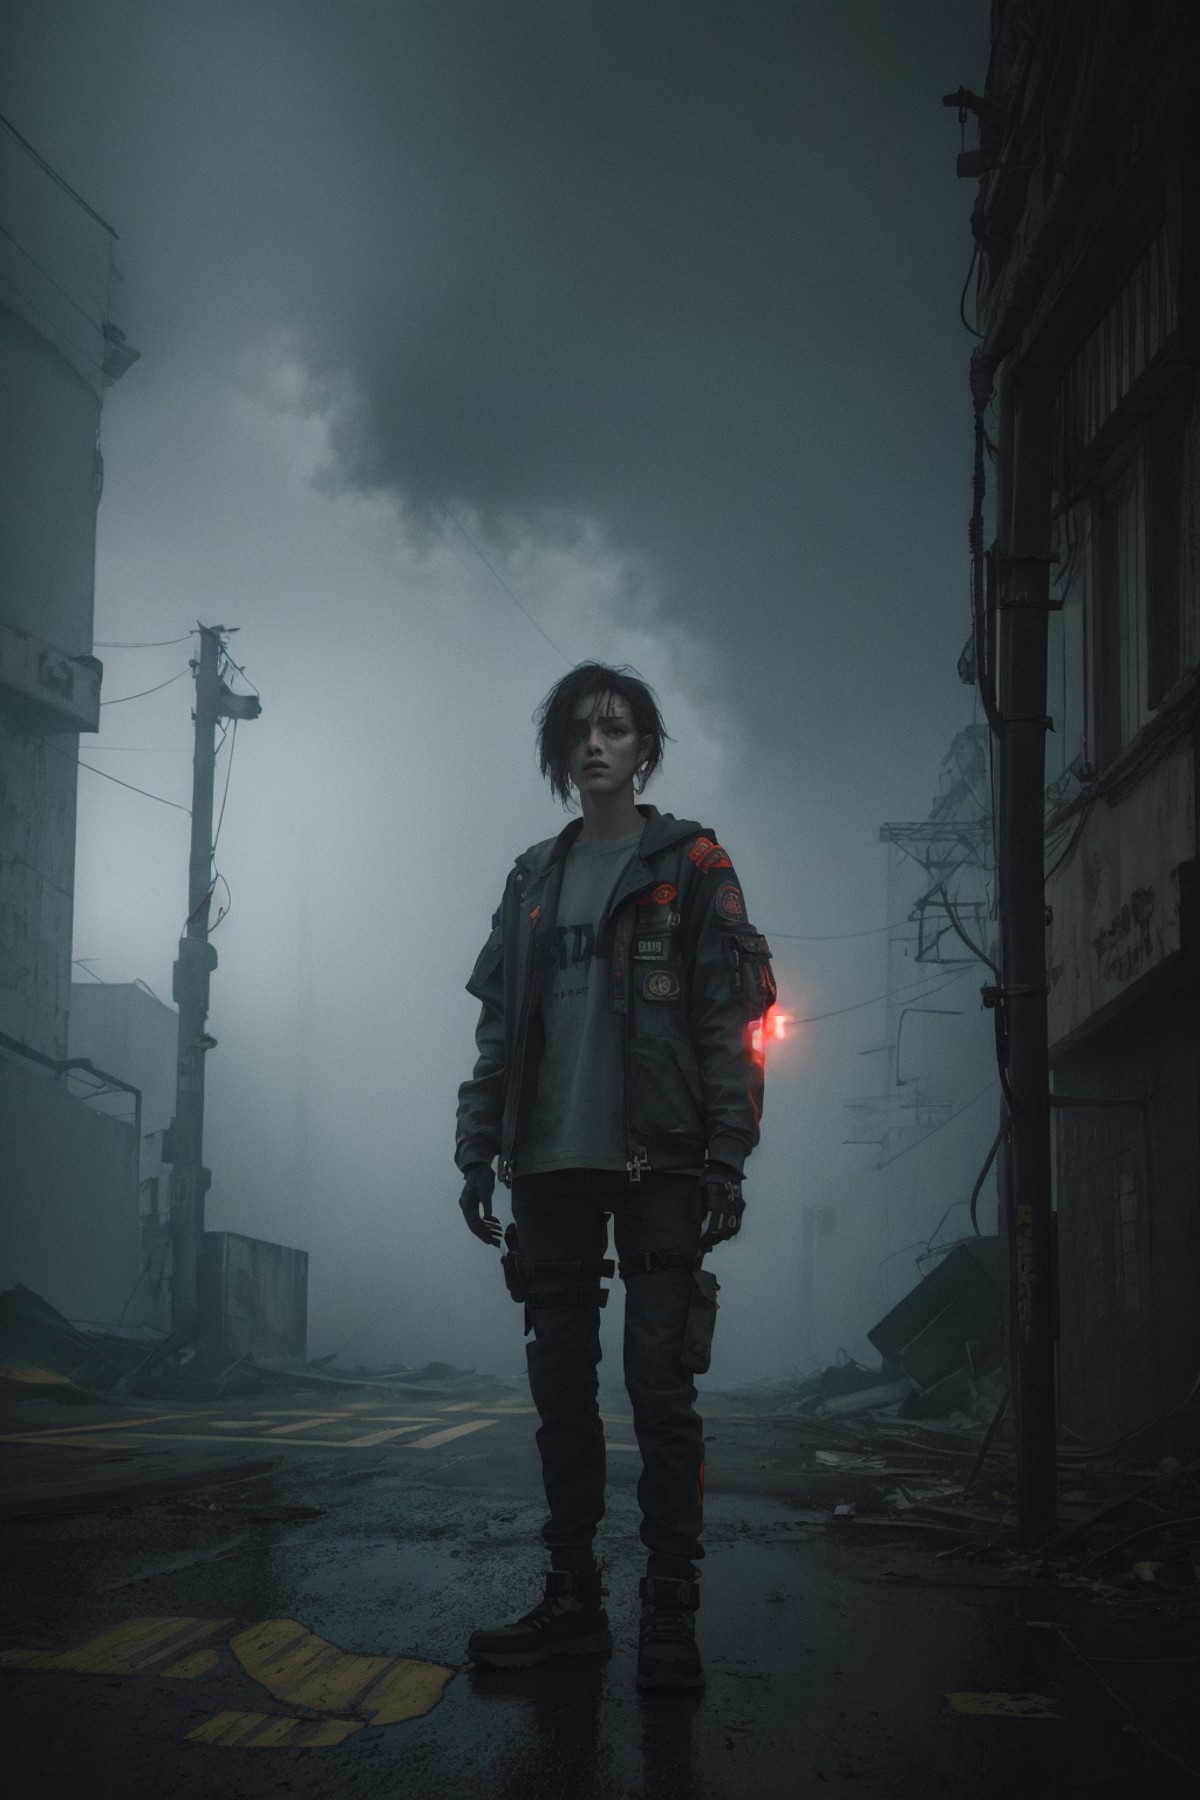 1girl,
Gritty neon, synthetic textures, modded limbs, worn materials, atmospheric fog, rebellious stances, urban decay, la...